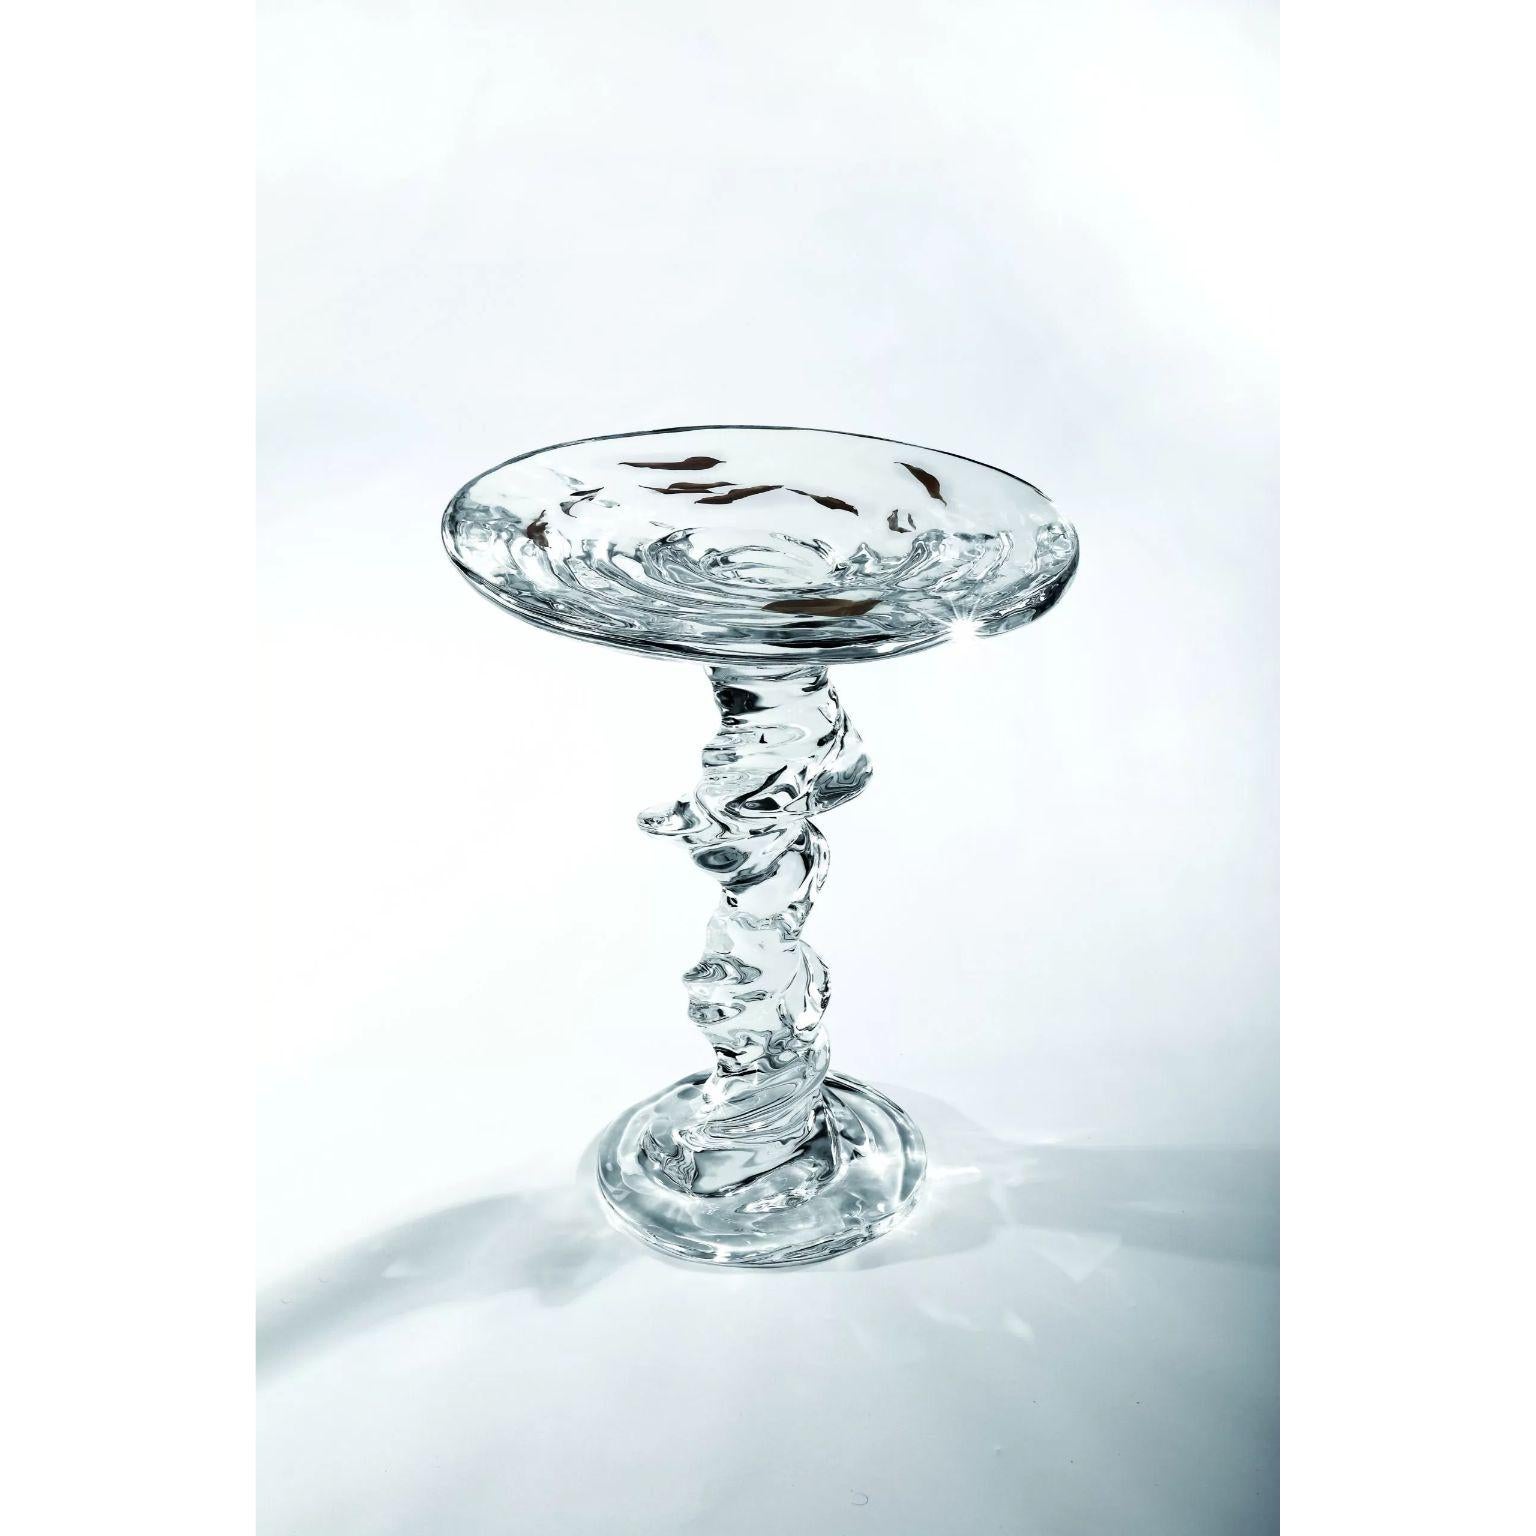 Round Spiral Table by Dainte
Dimensions: D 47 x H 55 cm.
Materials: Crystal.

This finely crafted crystal round table is a sophisticated piece of decor that will significantly enhance any space. making a striking statement. Natural wooden branches